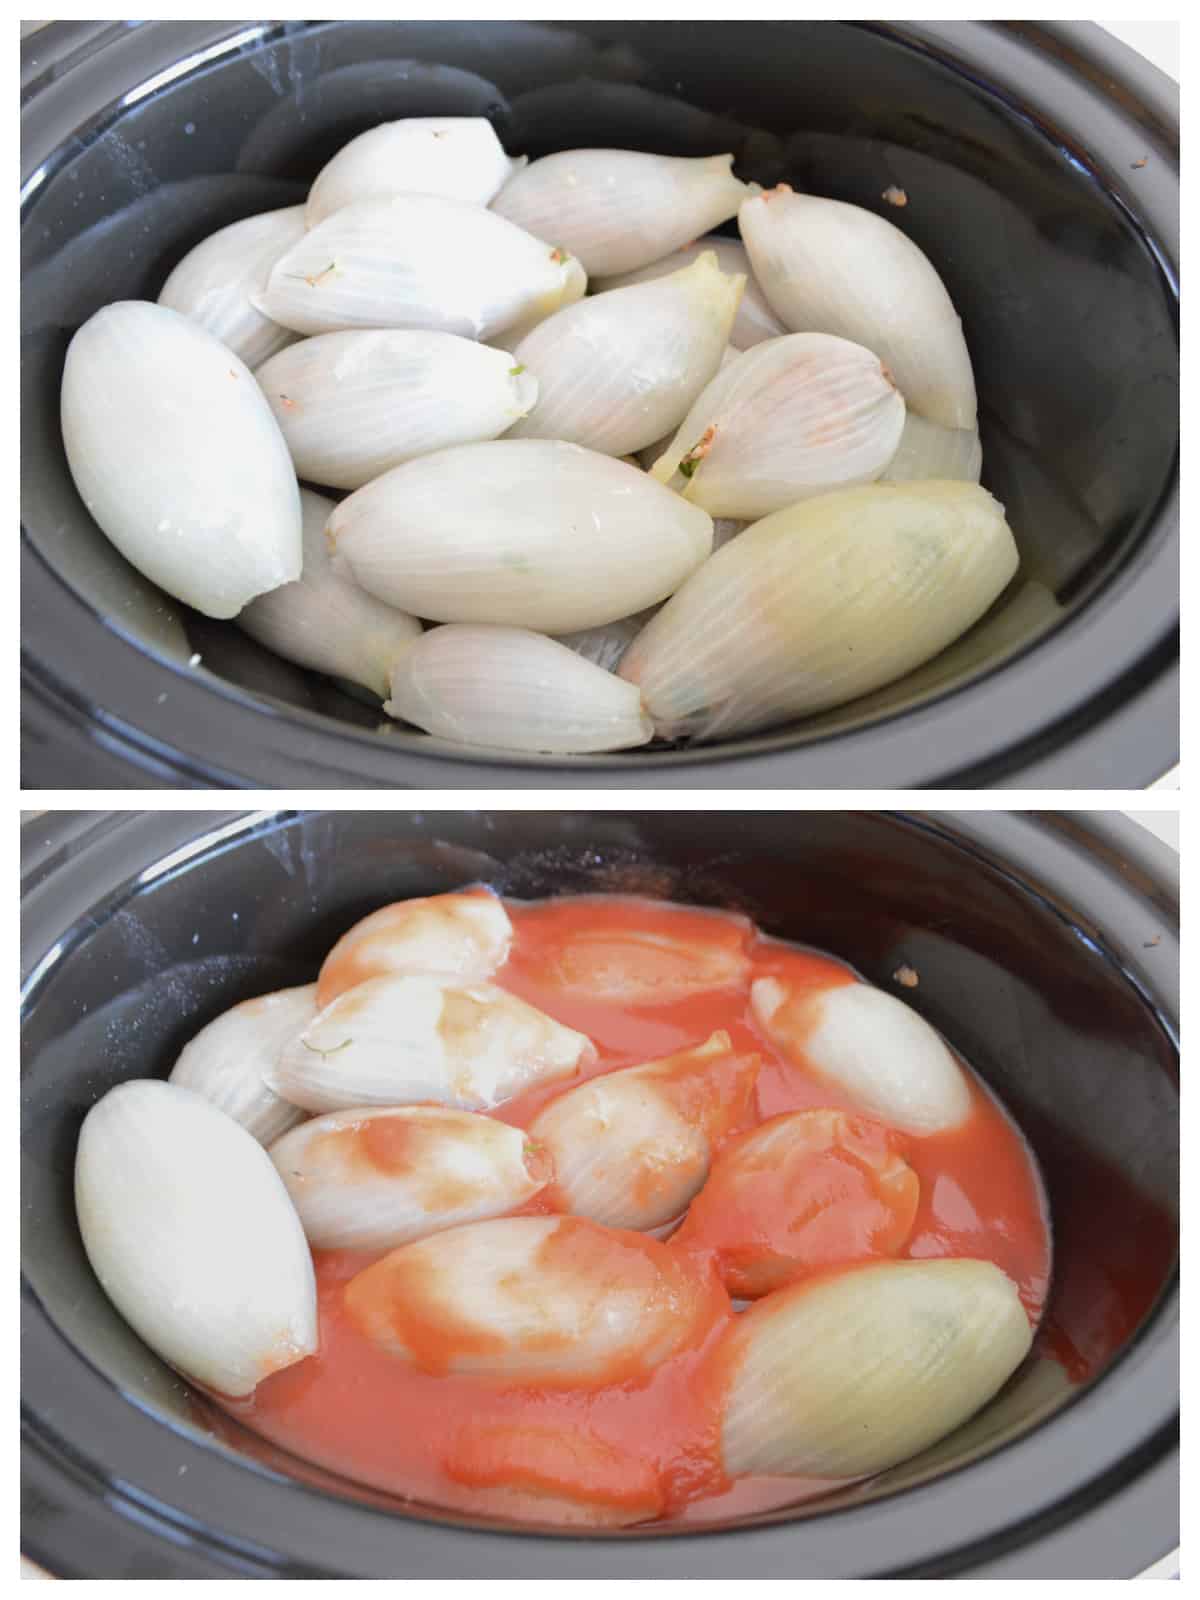 Images of how to cook stuffed onions in the slow cooker.